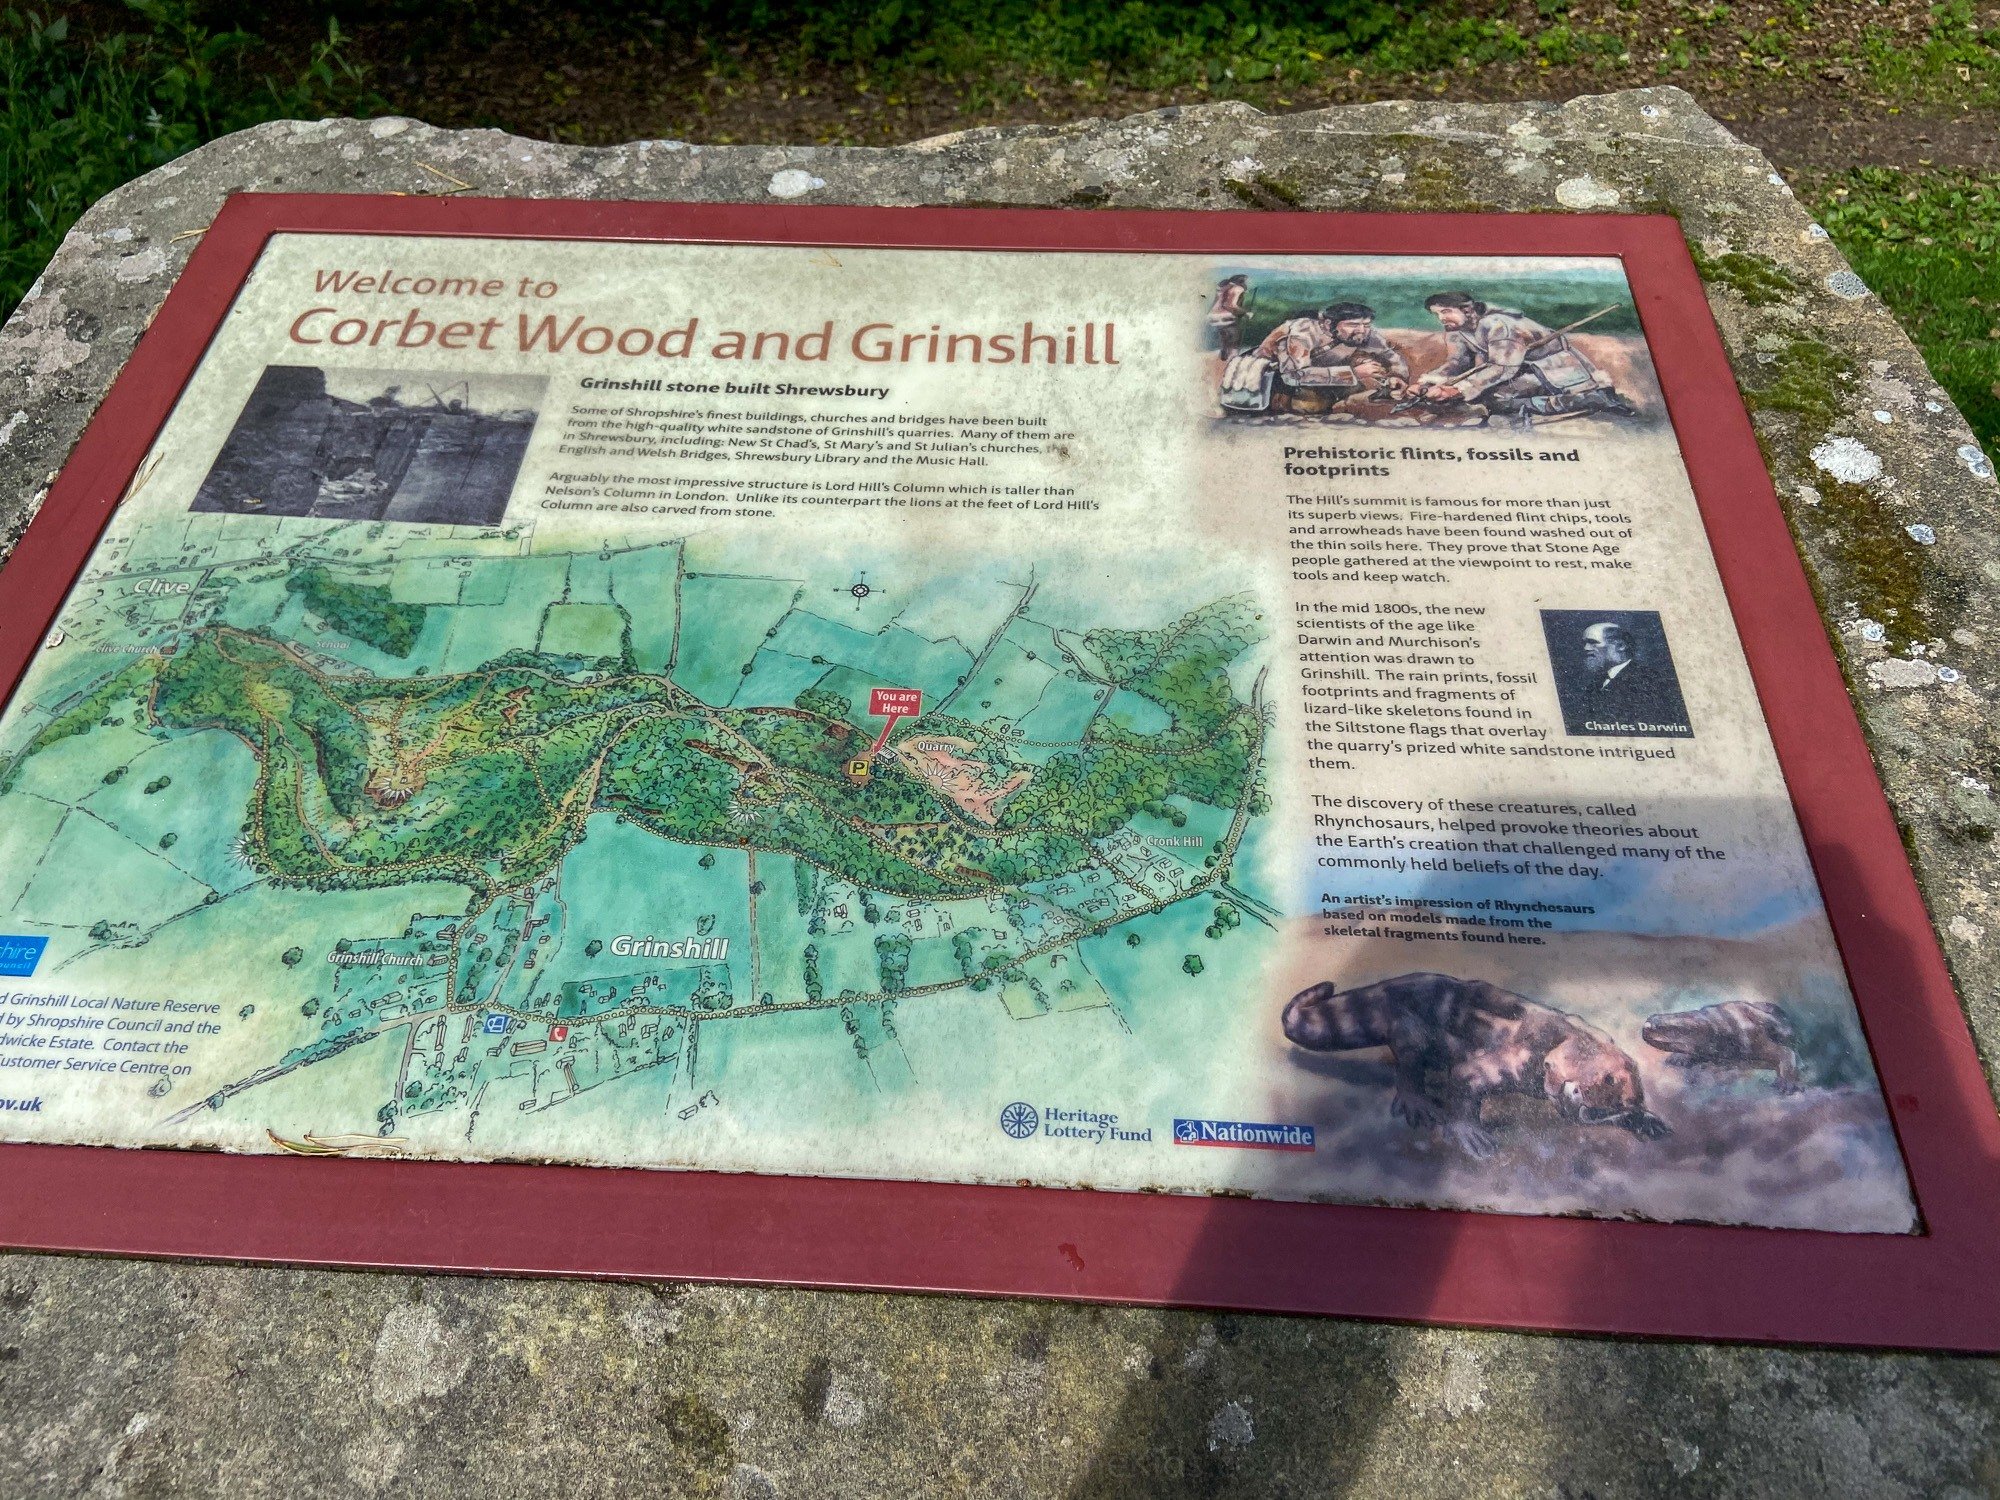  This board is in the Corbett Woods car park and shows some of the many trails you can take from there.